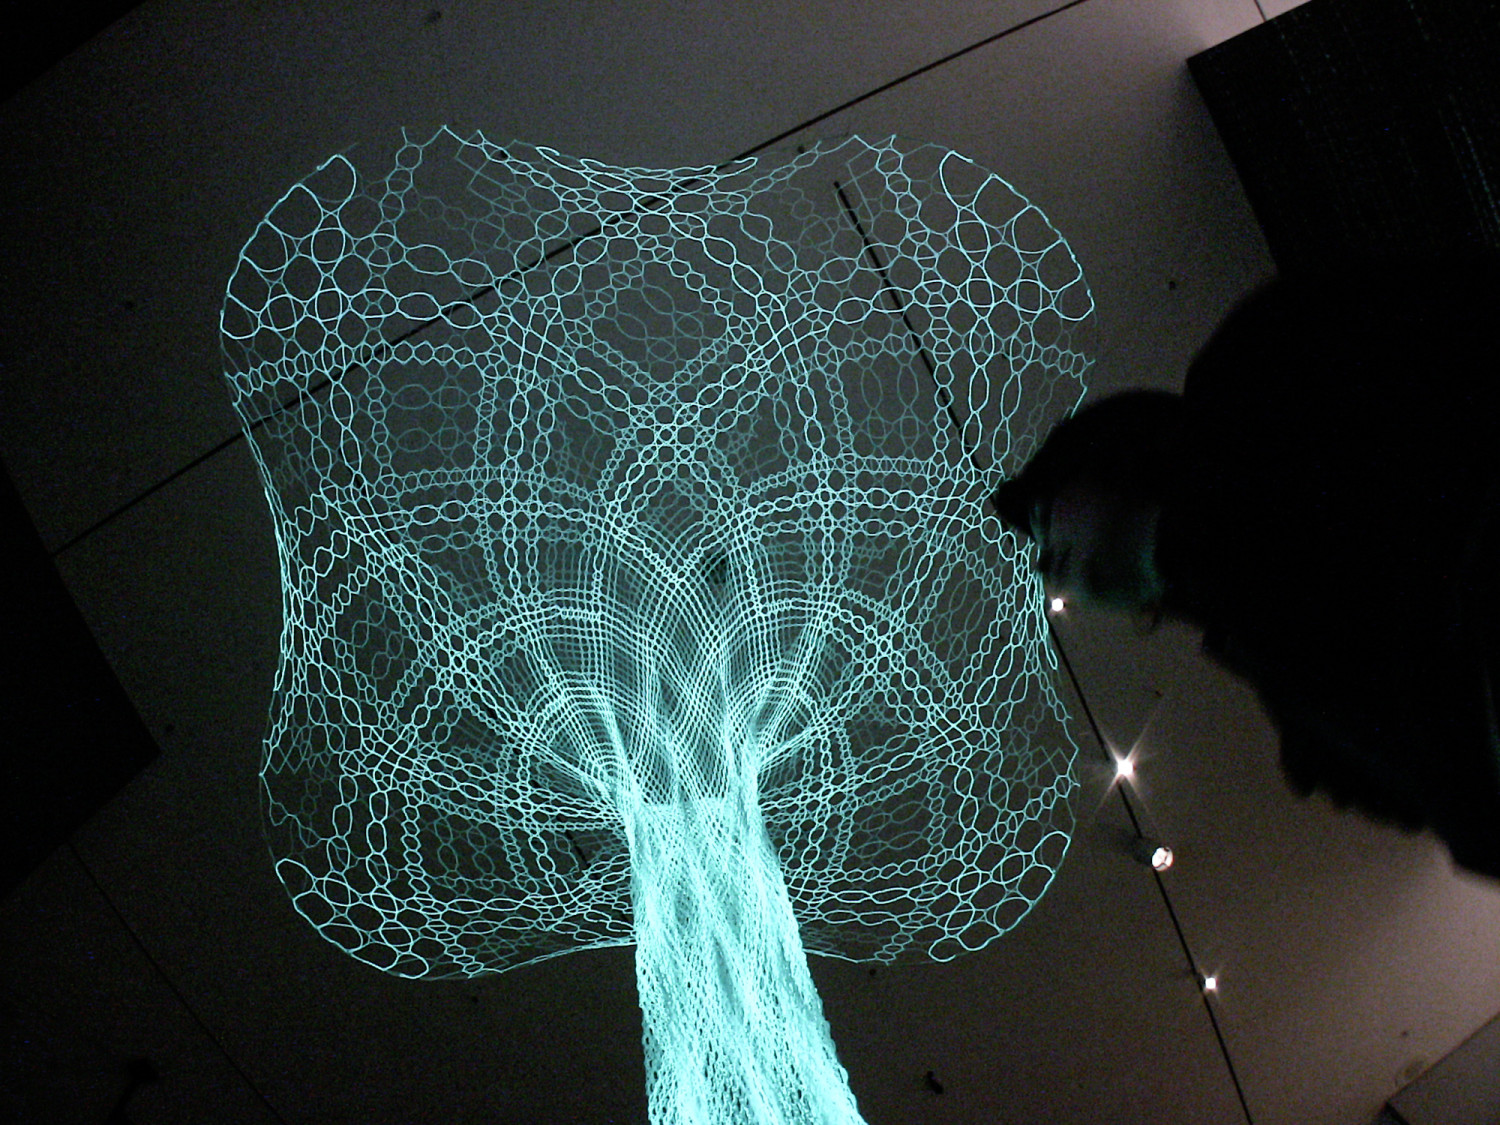 Commissioned to present our recent experiments in responsive textile architecture at the MoMA, New York. Sonumbra is the worlds first fully animated lace-architectural work.